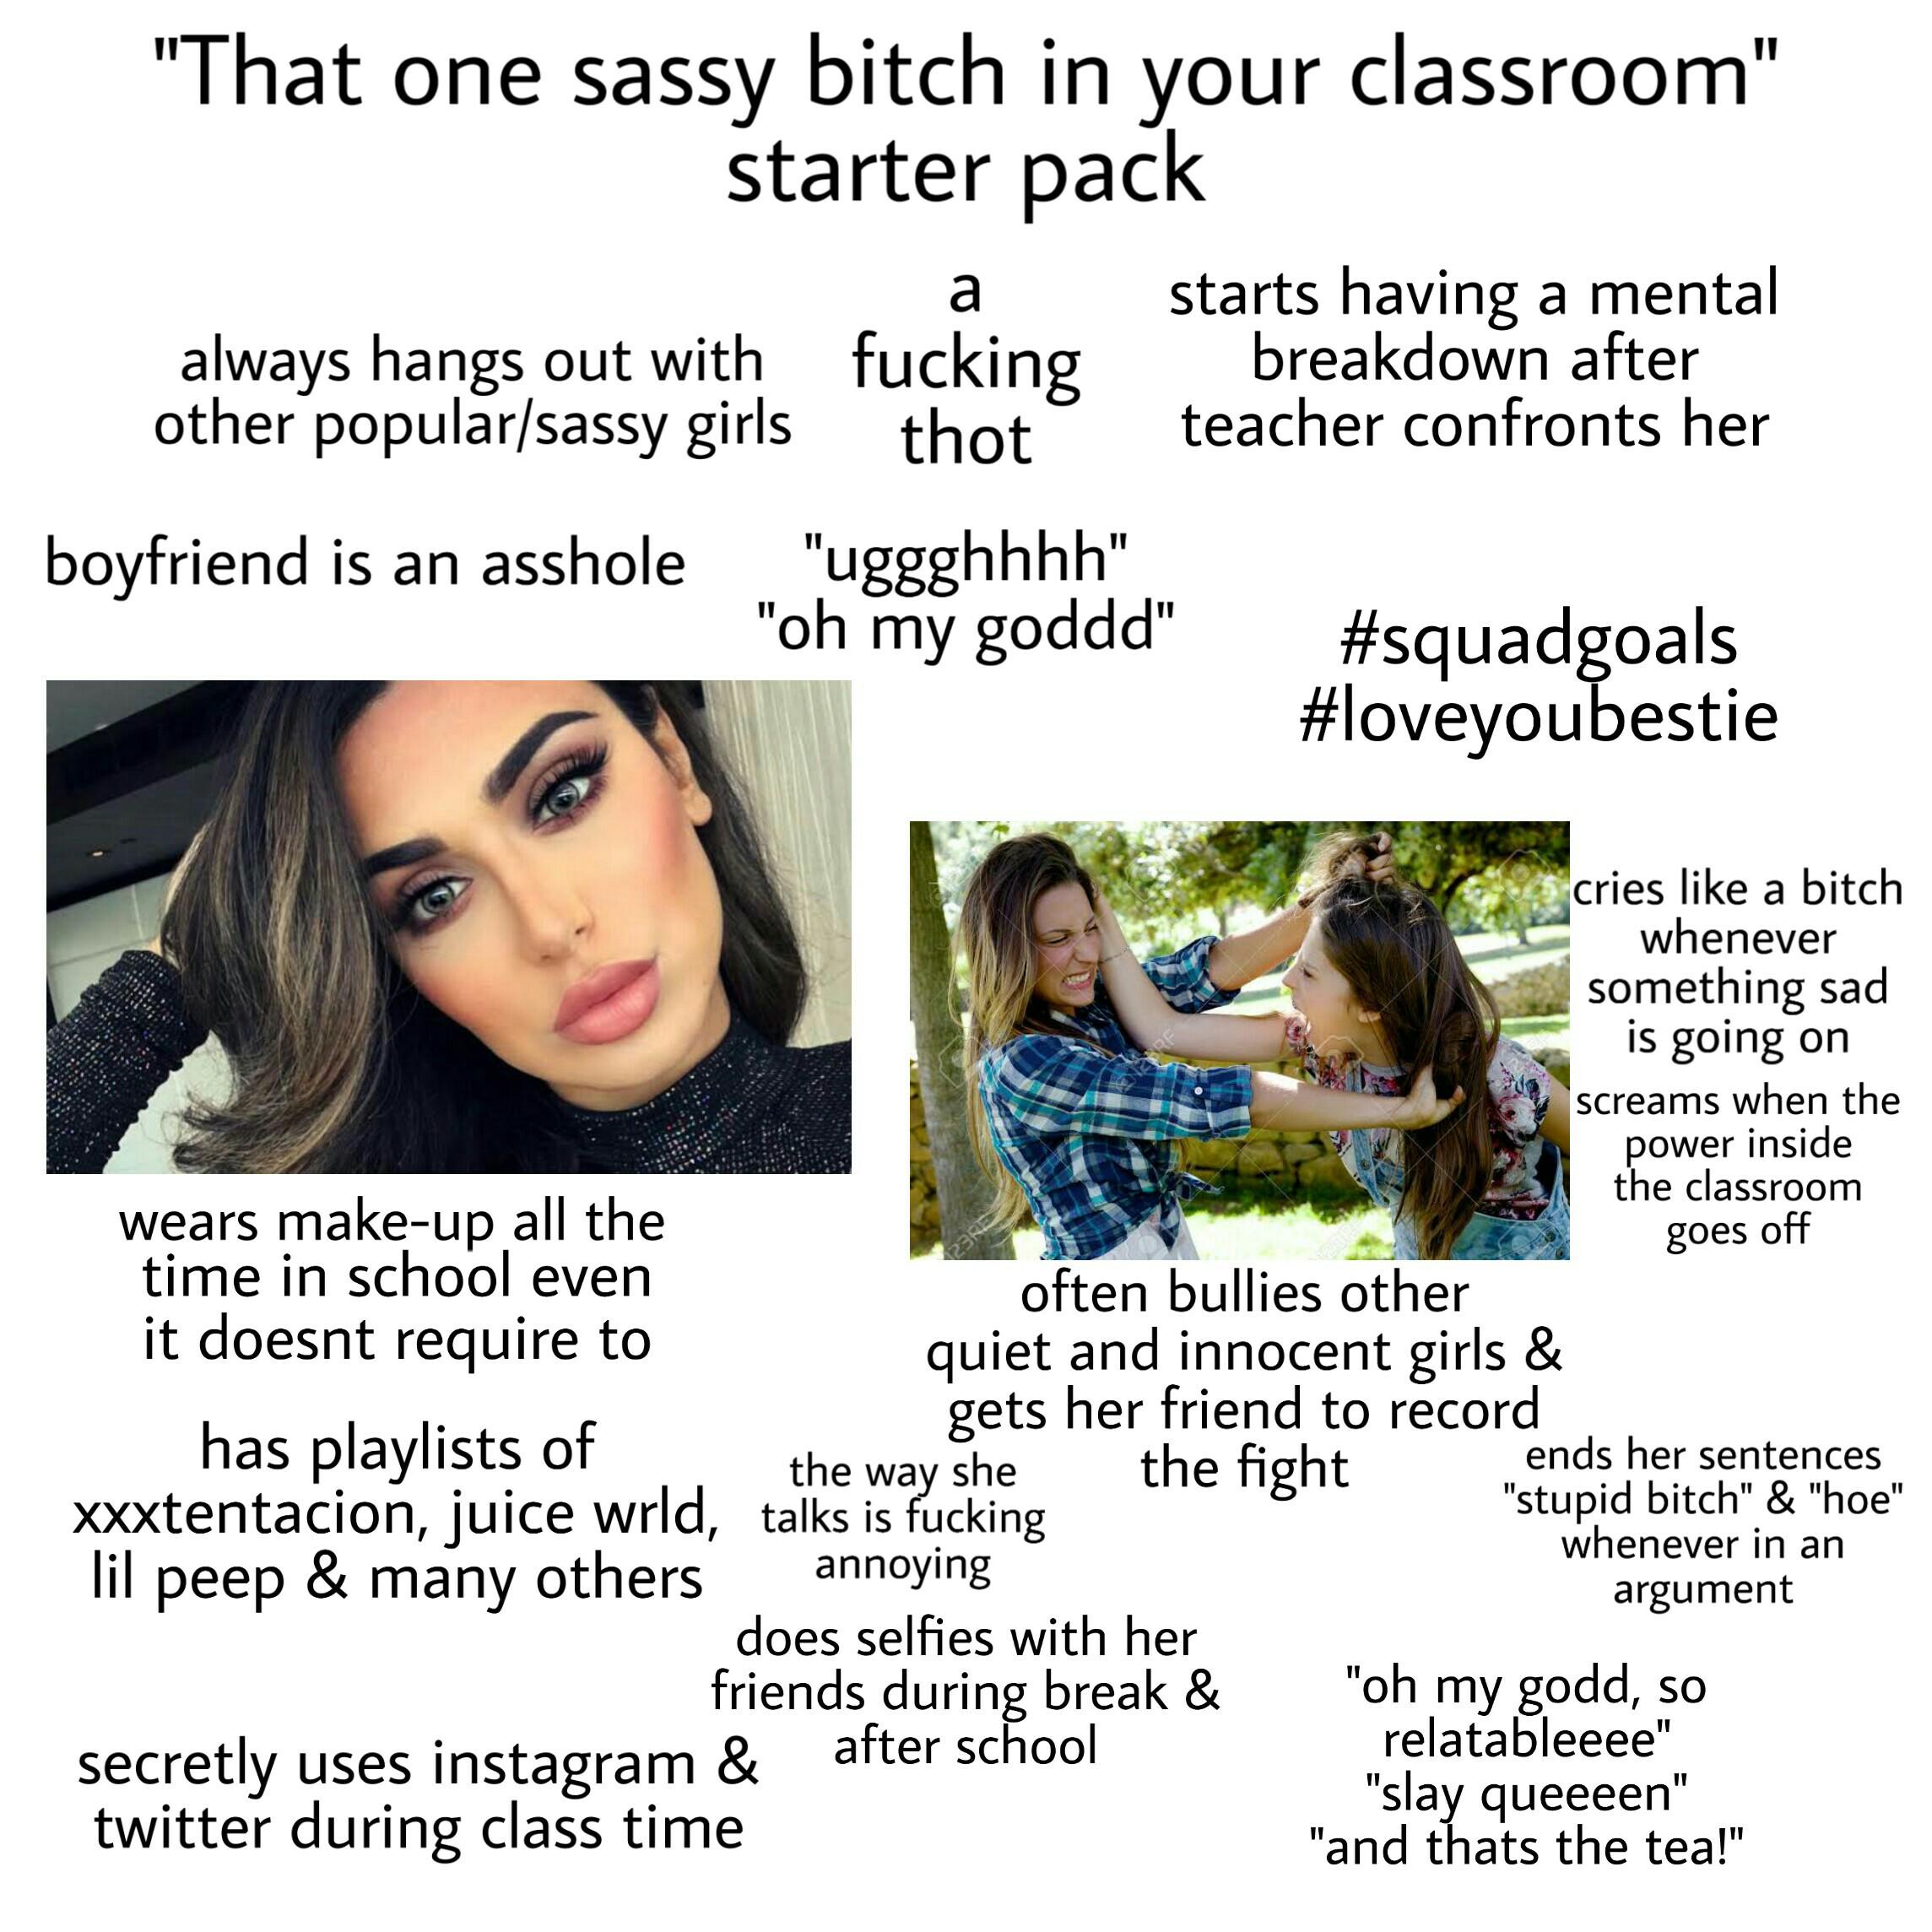 sassy starter pack - "That one sassy bitch in your classroom" starter pack starts having a mental always hangs out with fucking breakdown after other popularsassy girls thot teacher confronts her boyfriend is an asshole "uggghhhh" "oh my goddd" cries a bi